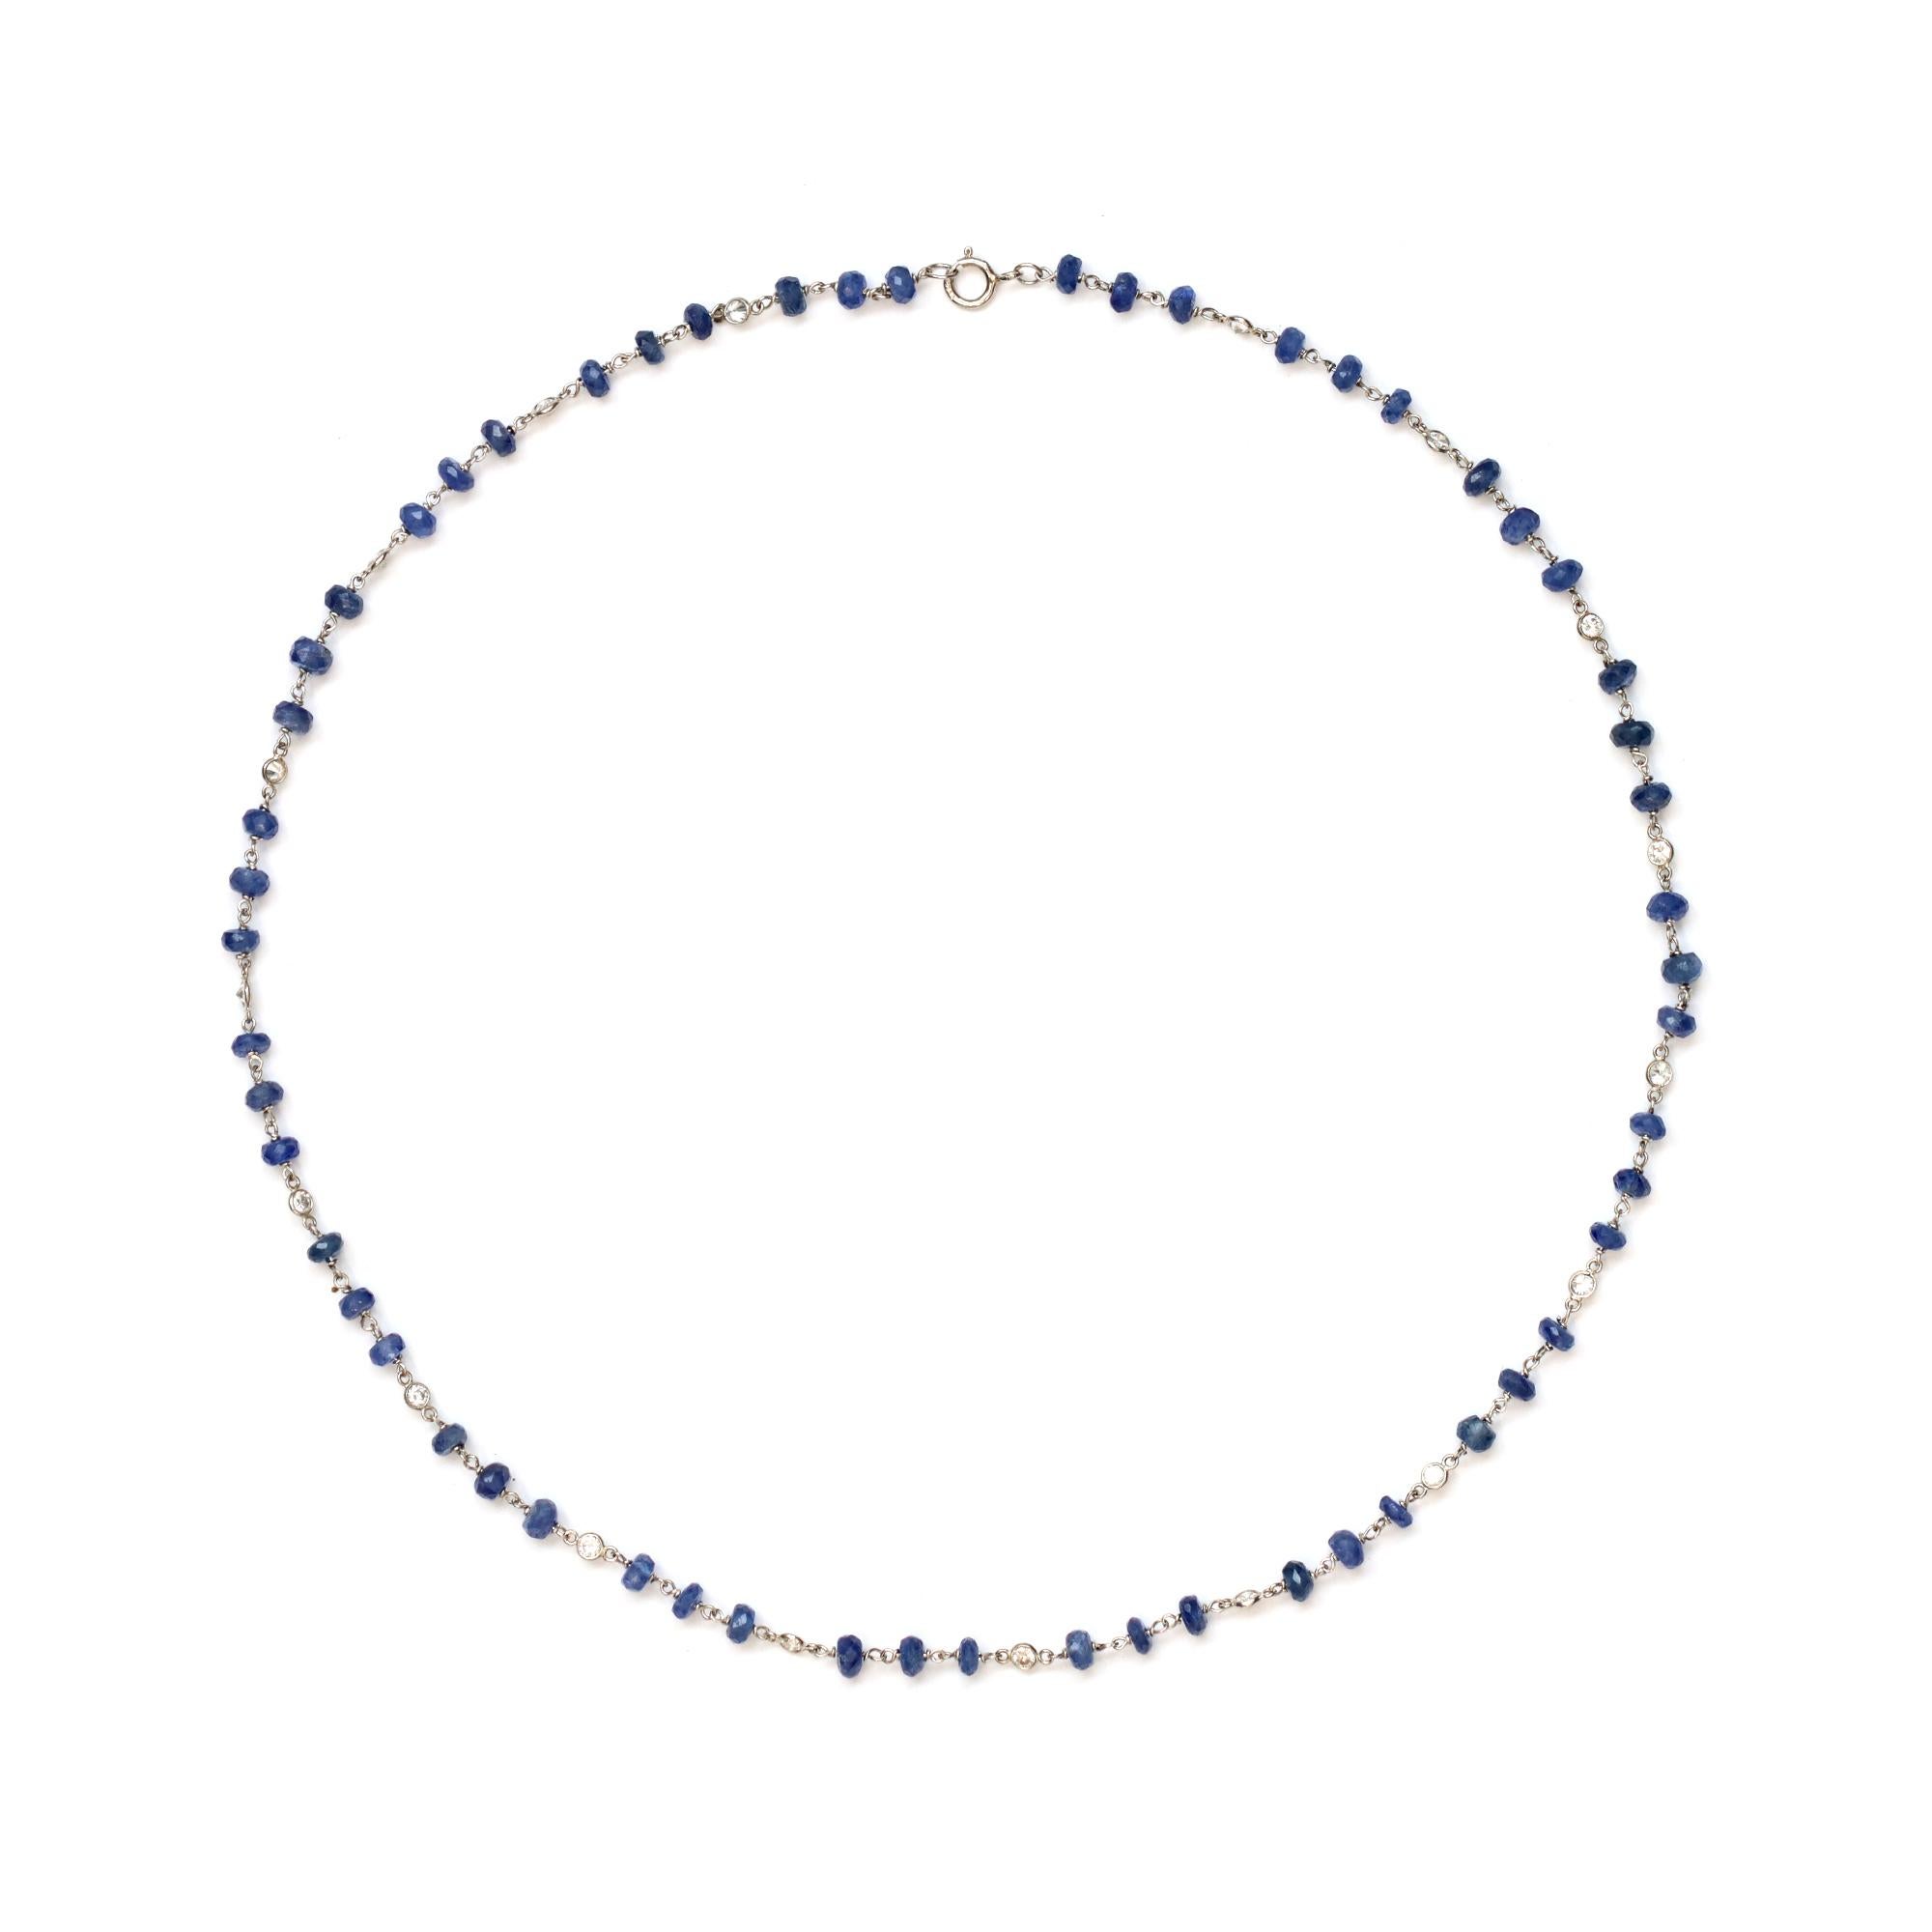 A dainty hand made necklace created by Rosaria Varra. It features natural faceted blue sapphire beads alternated with bezel set round diamonds in the style of “diamond by the yard” setting. The necklace was hand executed in platinum. The diamond